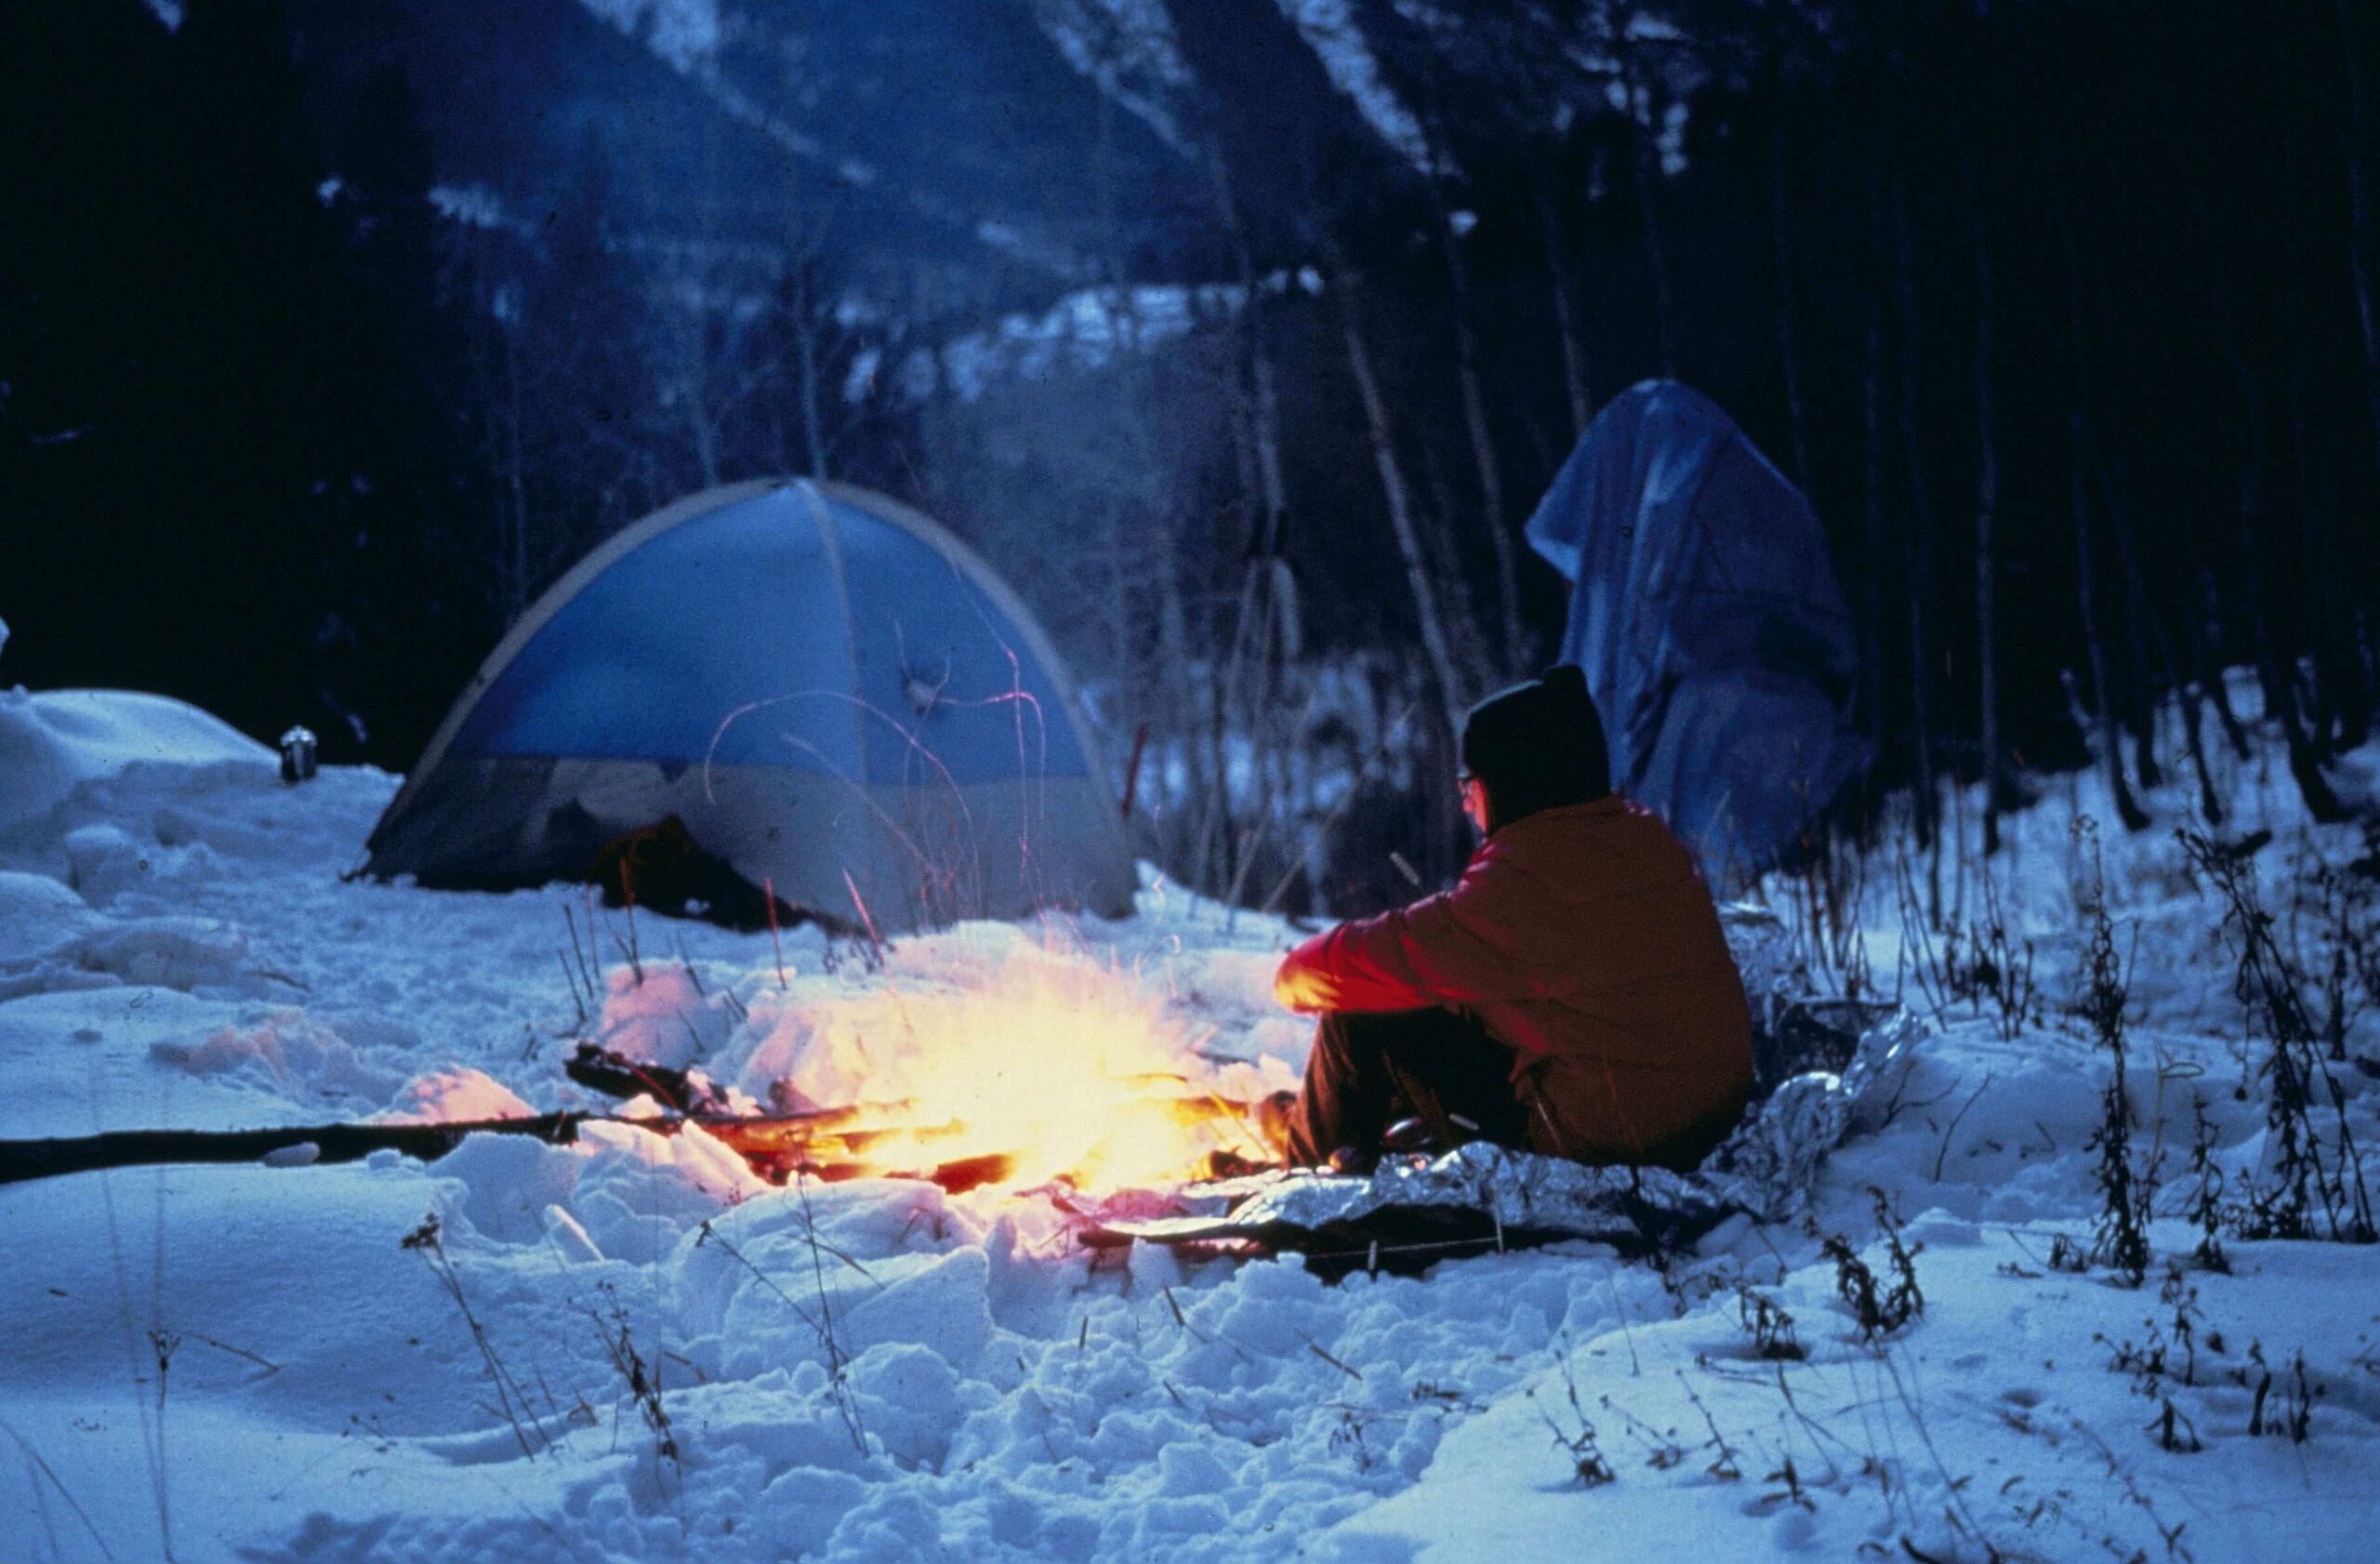 How cold is too colds for a 3 season tent?